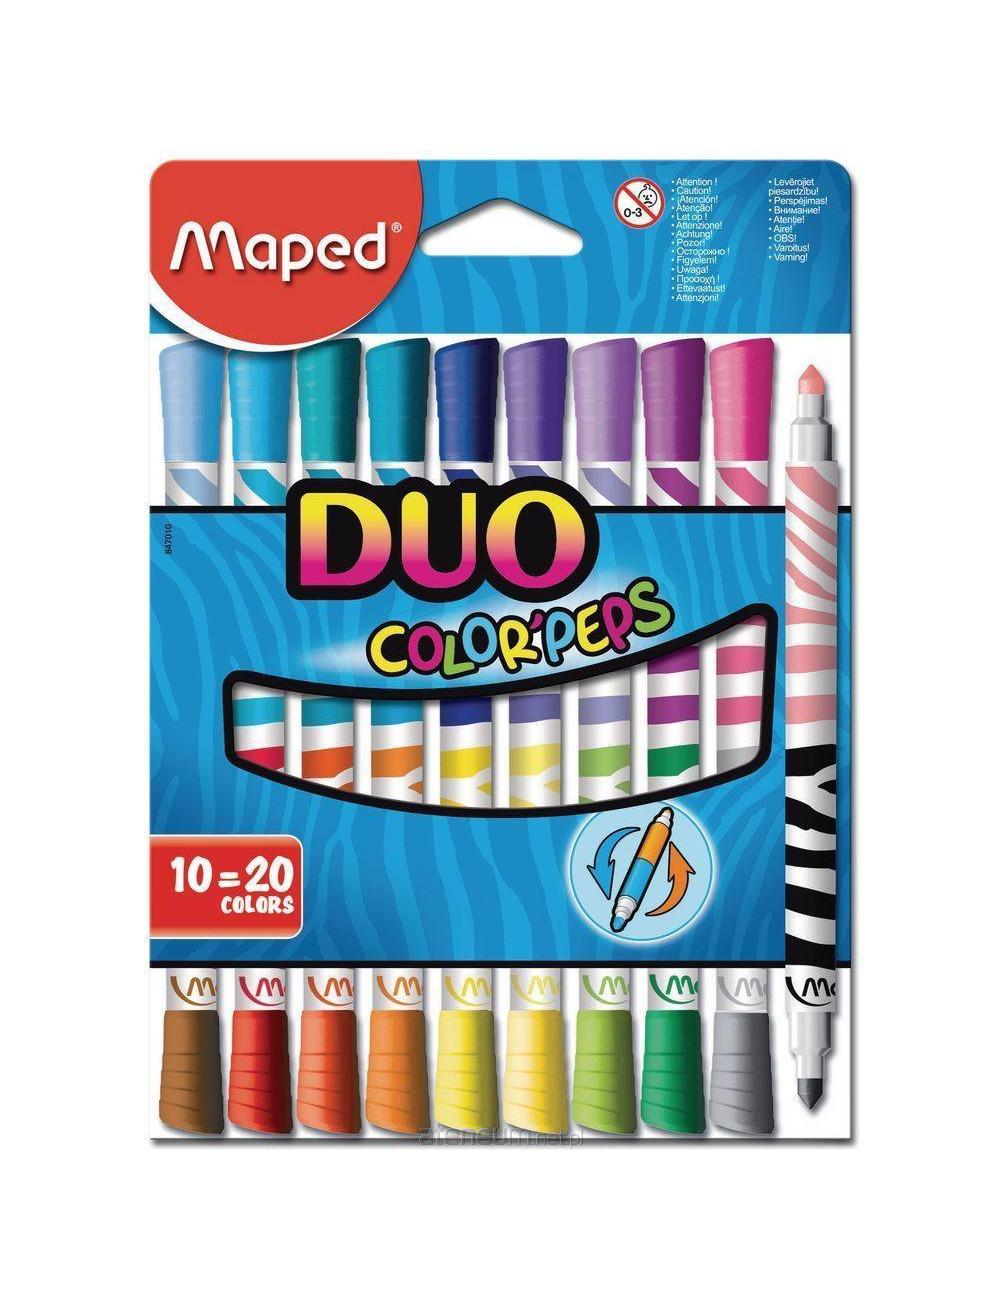 Flamastry Colorpeps Maped...